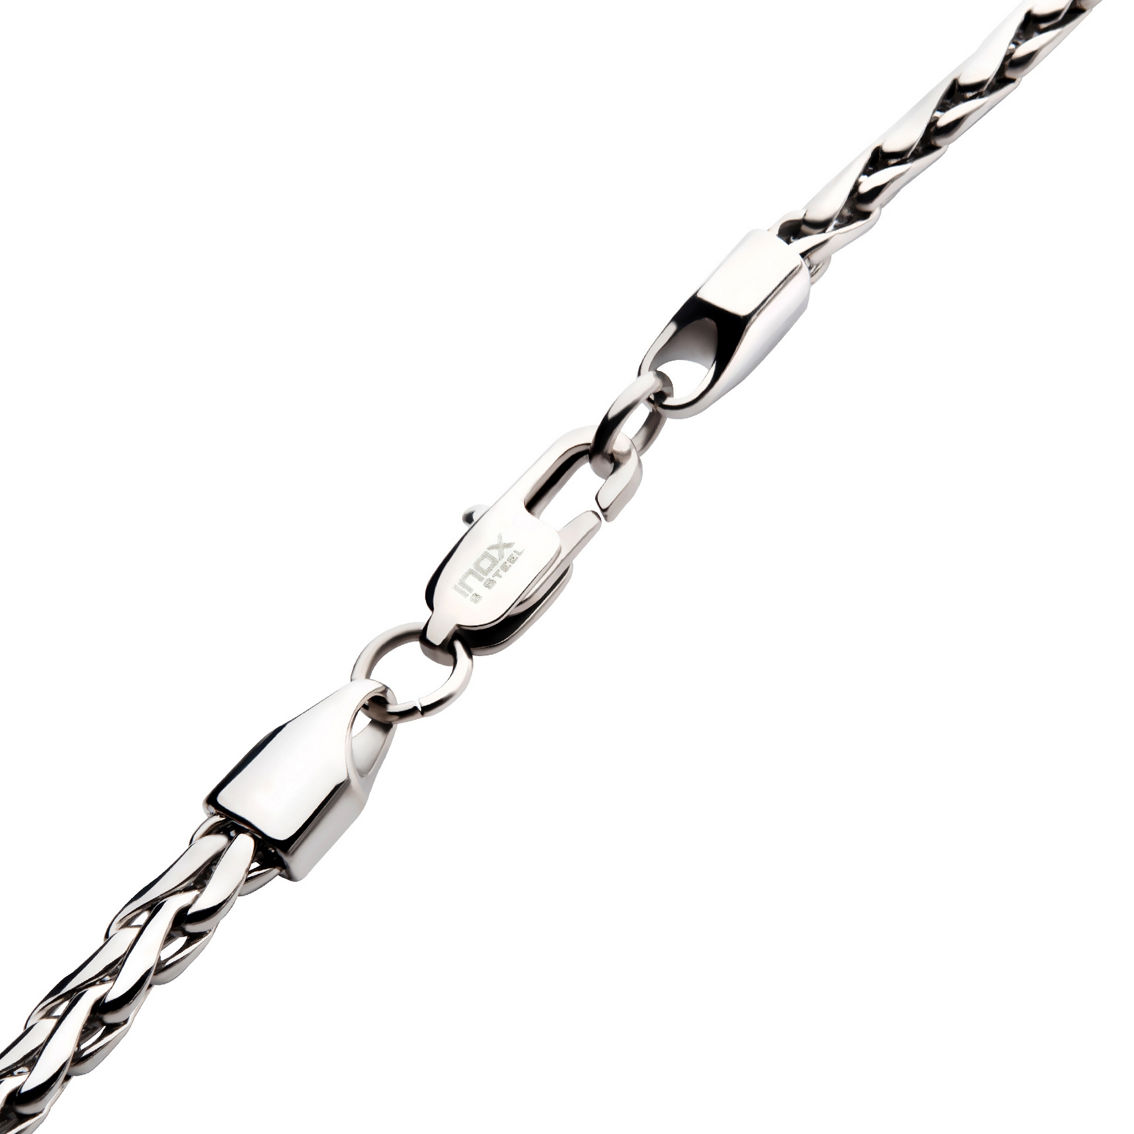 Inox Polished Finish Stainless Steel Spiga Chain Necklace - Image 2 of 4